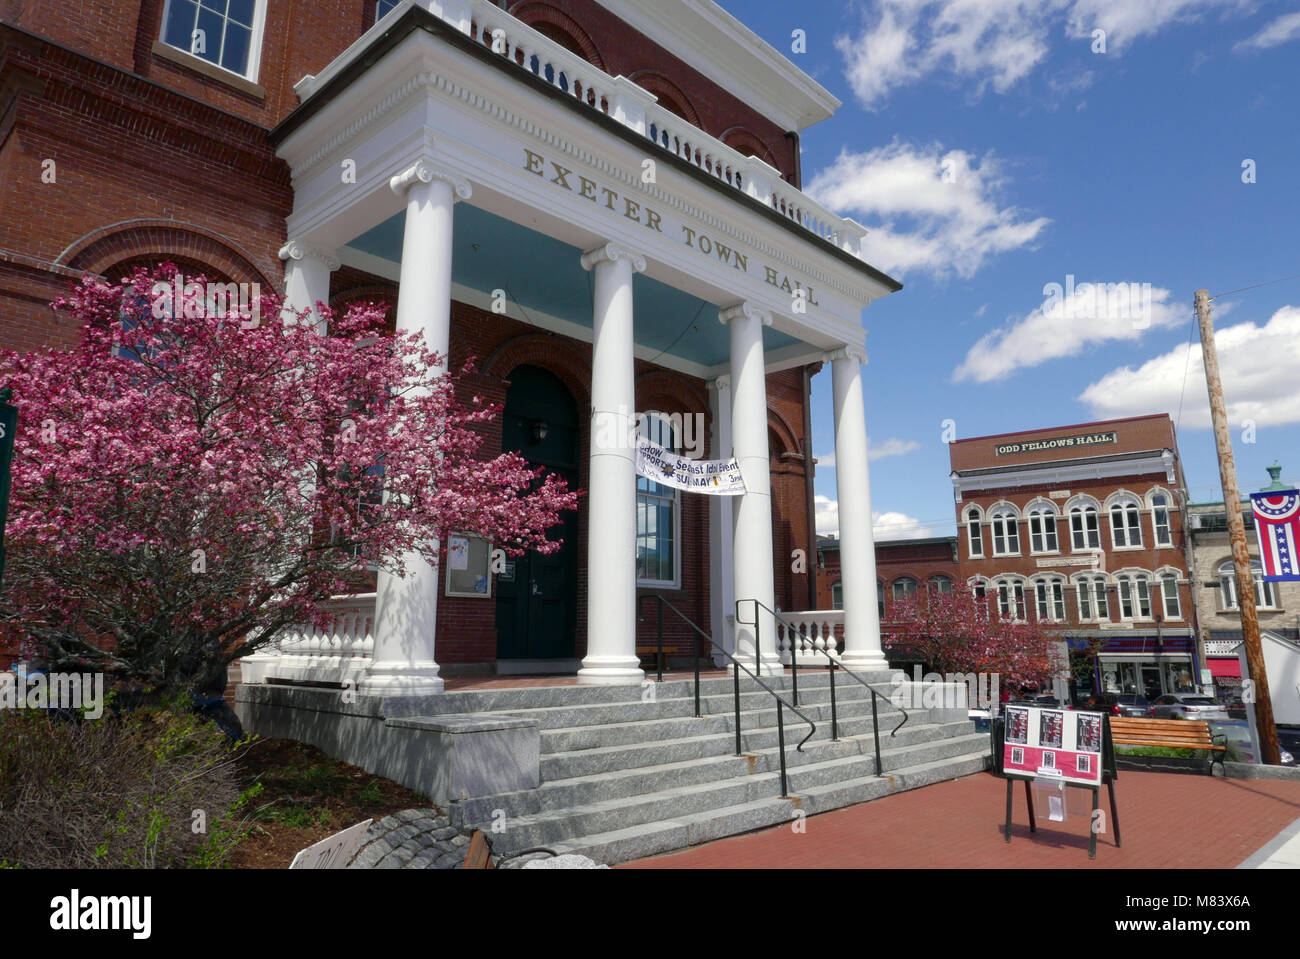 The Town Hall in Exeter New Hampshire USA Stock Photo